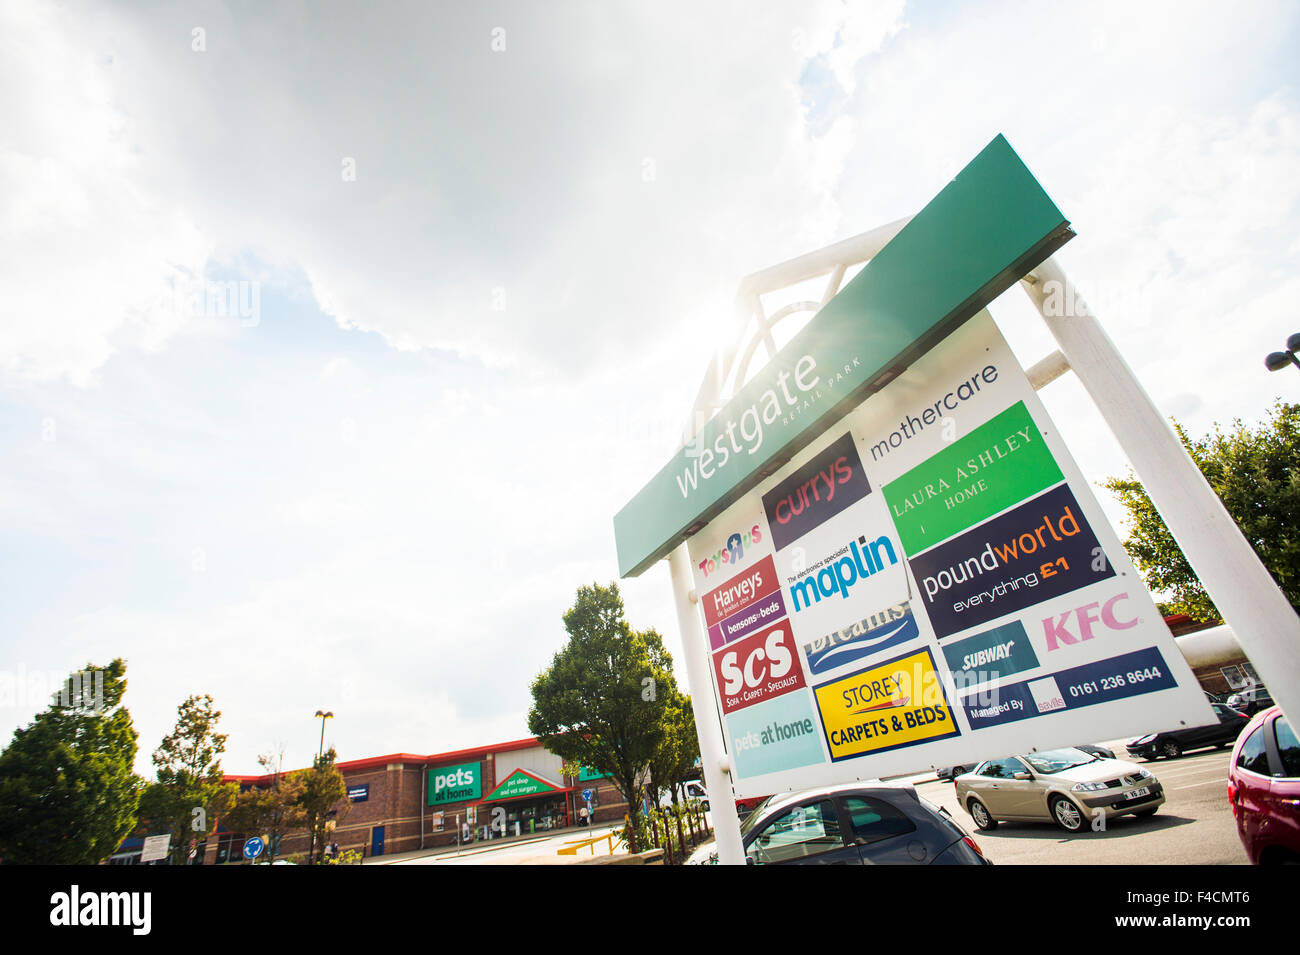 GV's and shoppers at Westgate Retail Park, Wakefield. A British Land PLC retail property. Stock Photo